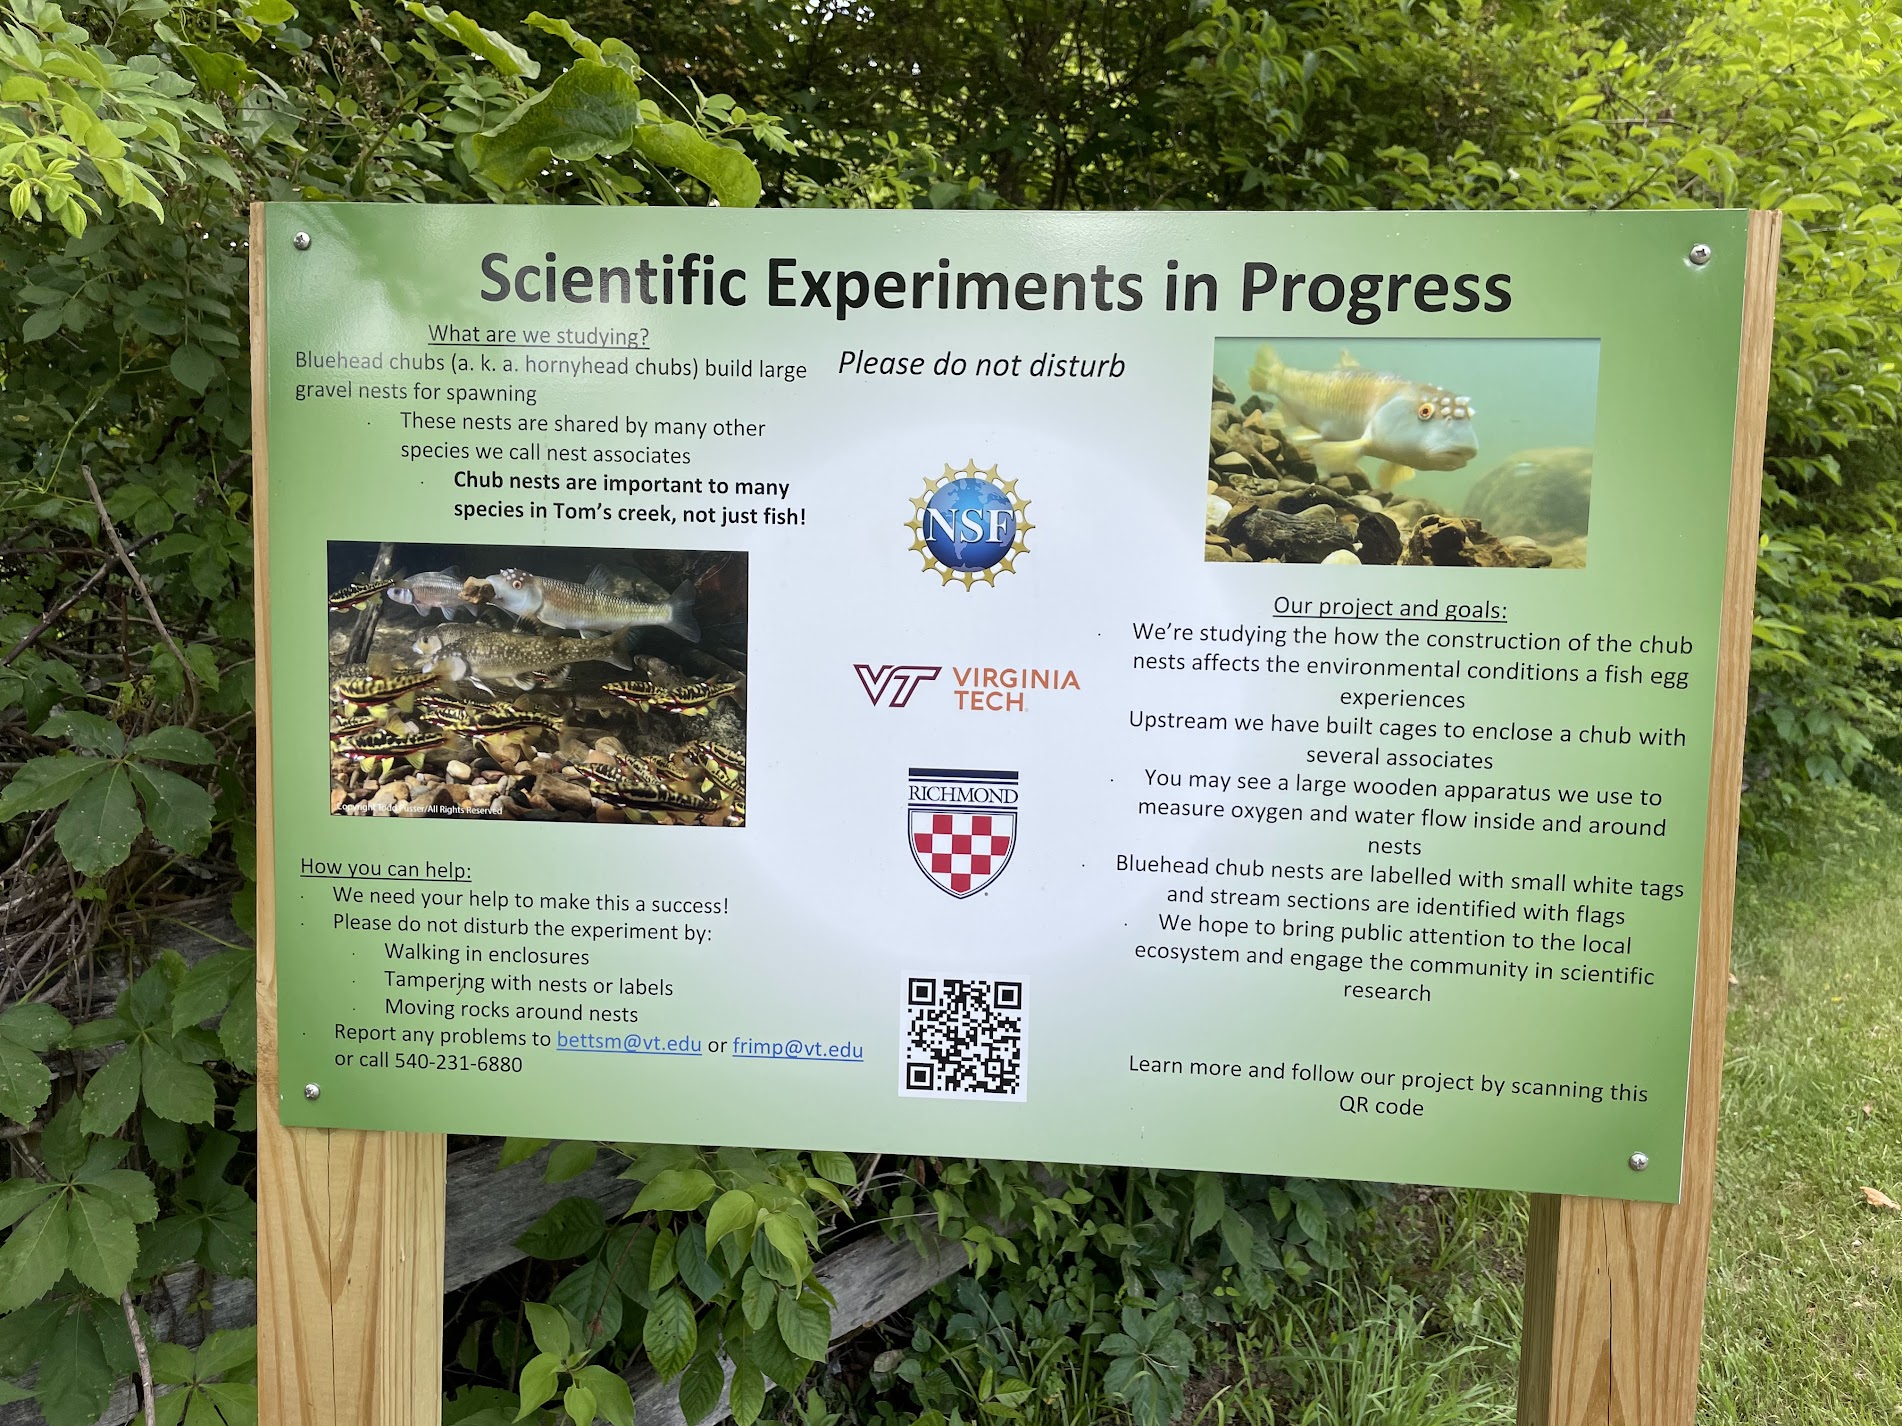 A green and white sign reads “Scientific Experiments in Progress.” Two pictures of a fish, the Bluehead Chub, decorate the sign as well as stating the intentions and goals of the project. 